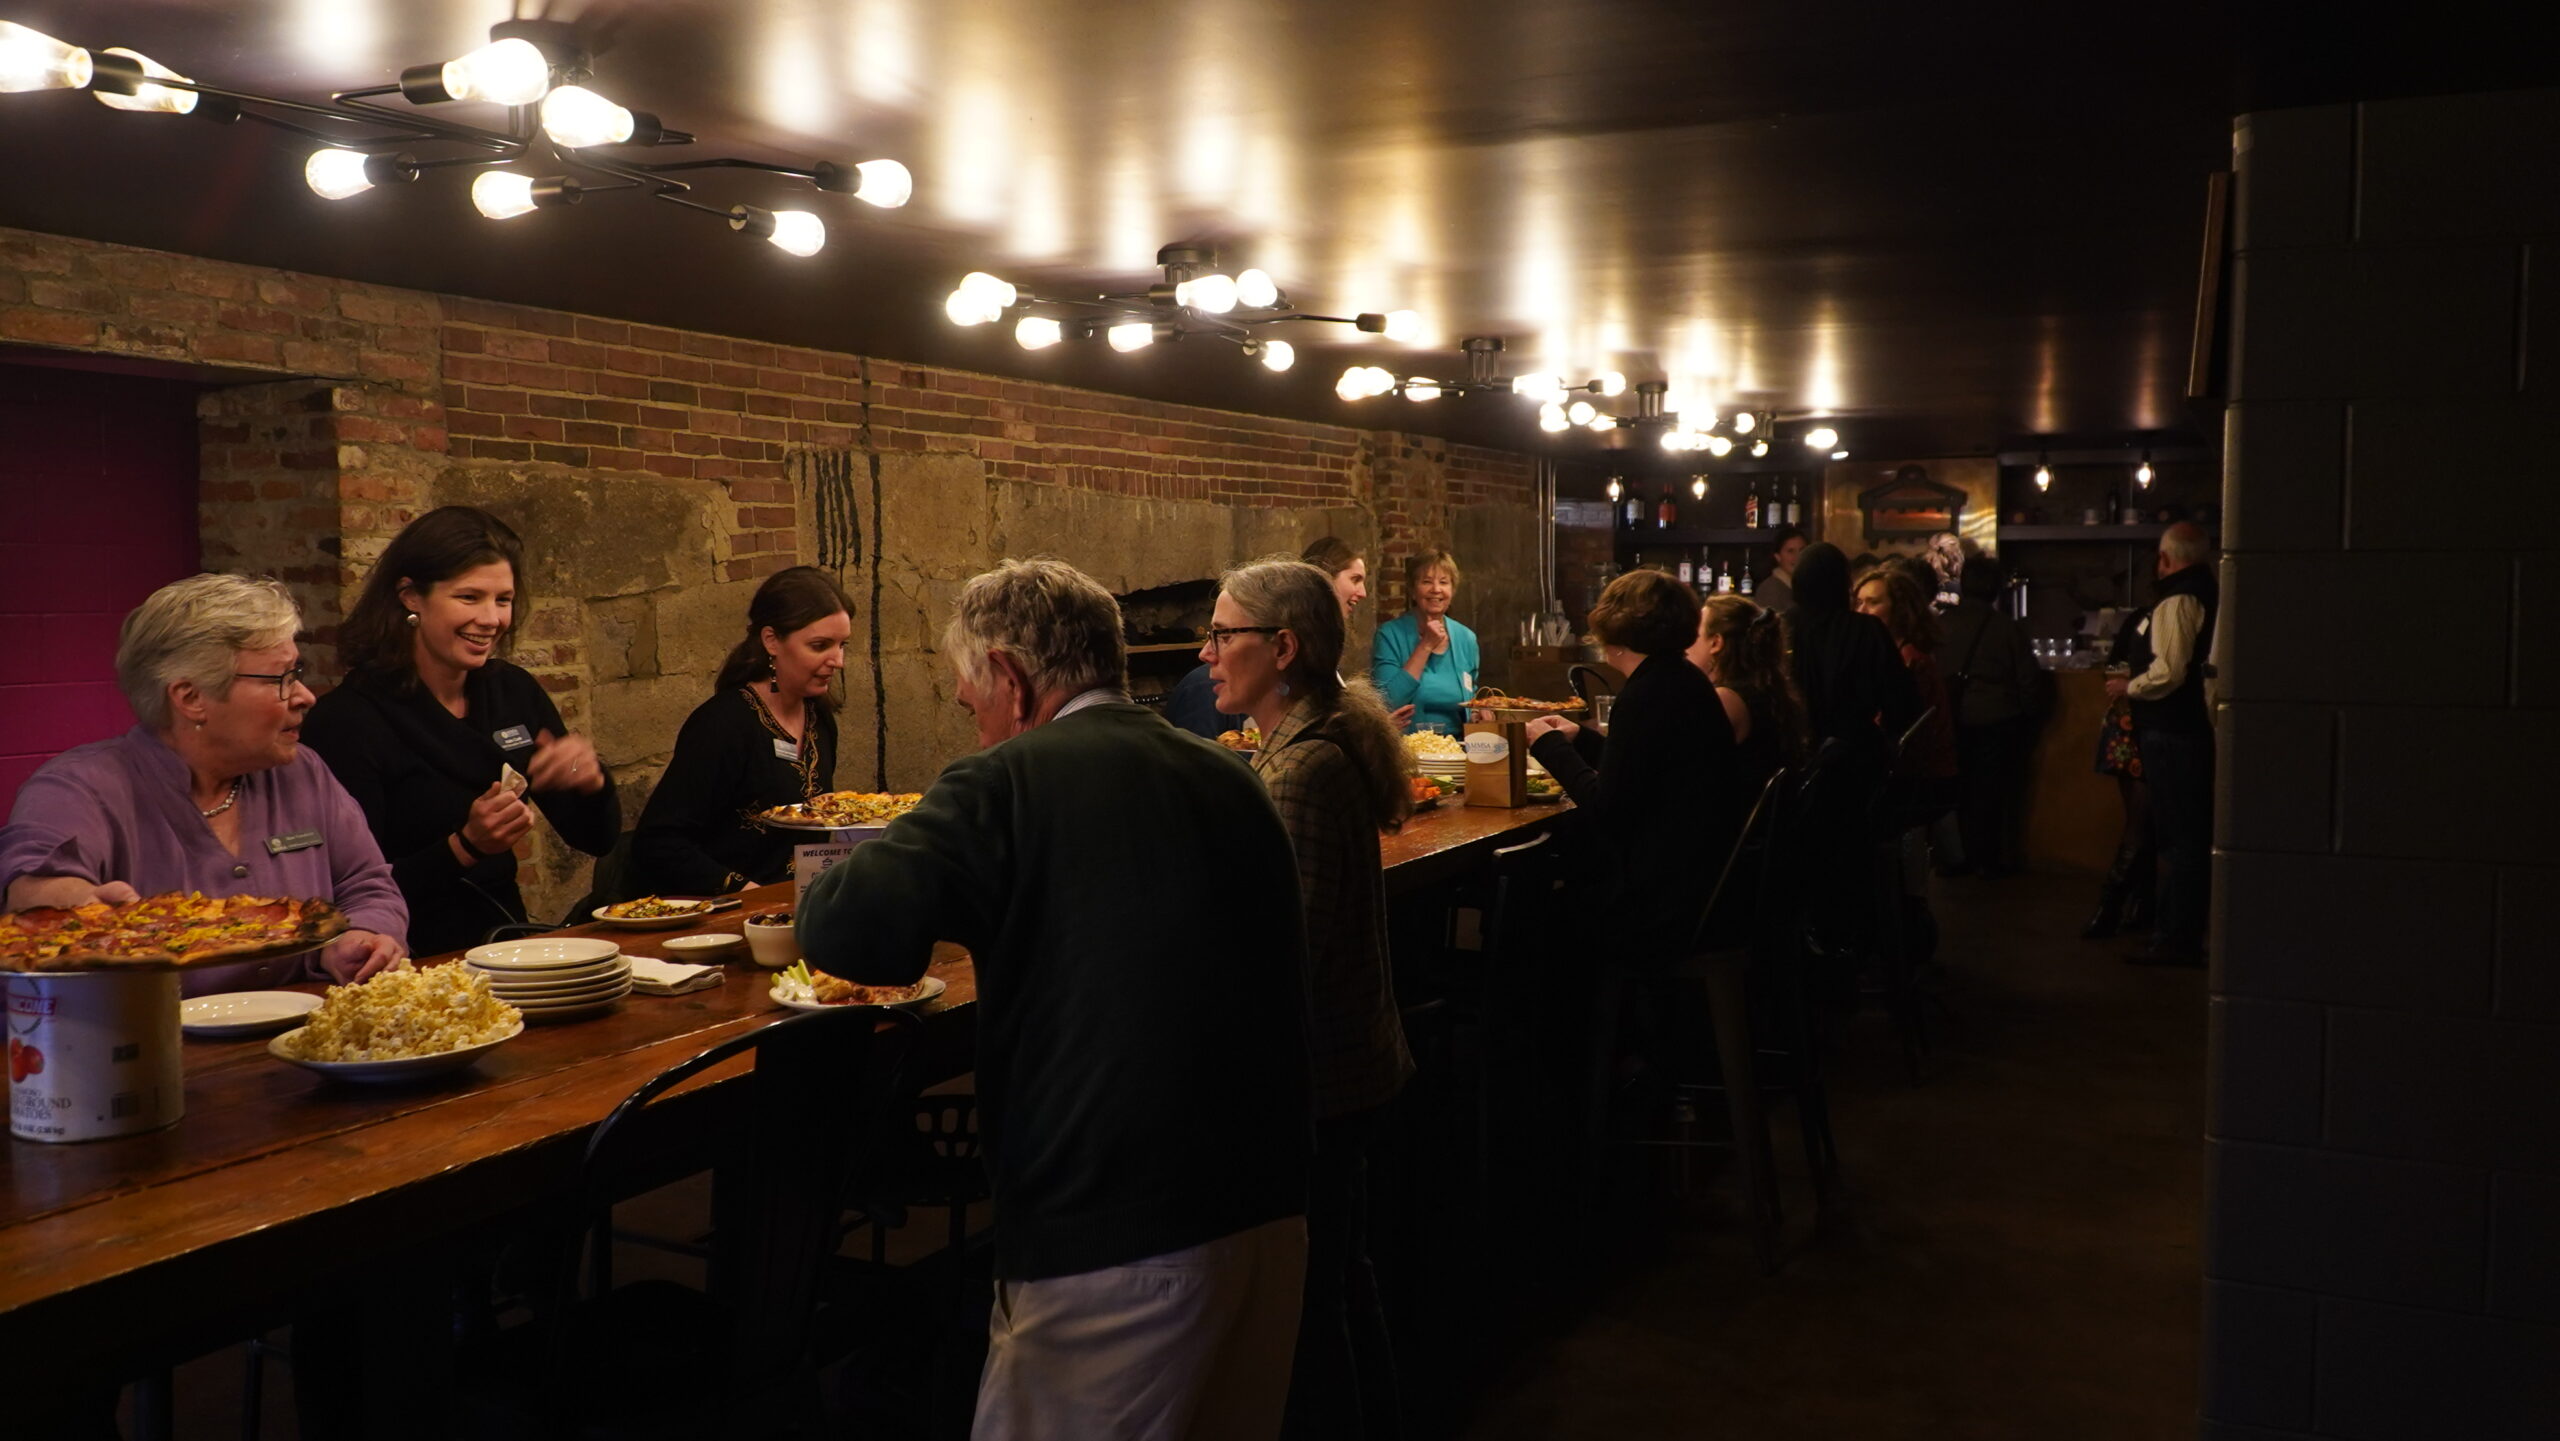 MMSA staff and board members can be seen under moody lighting eating and conversing at Cushnoc's basement tap room.